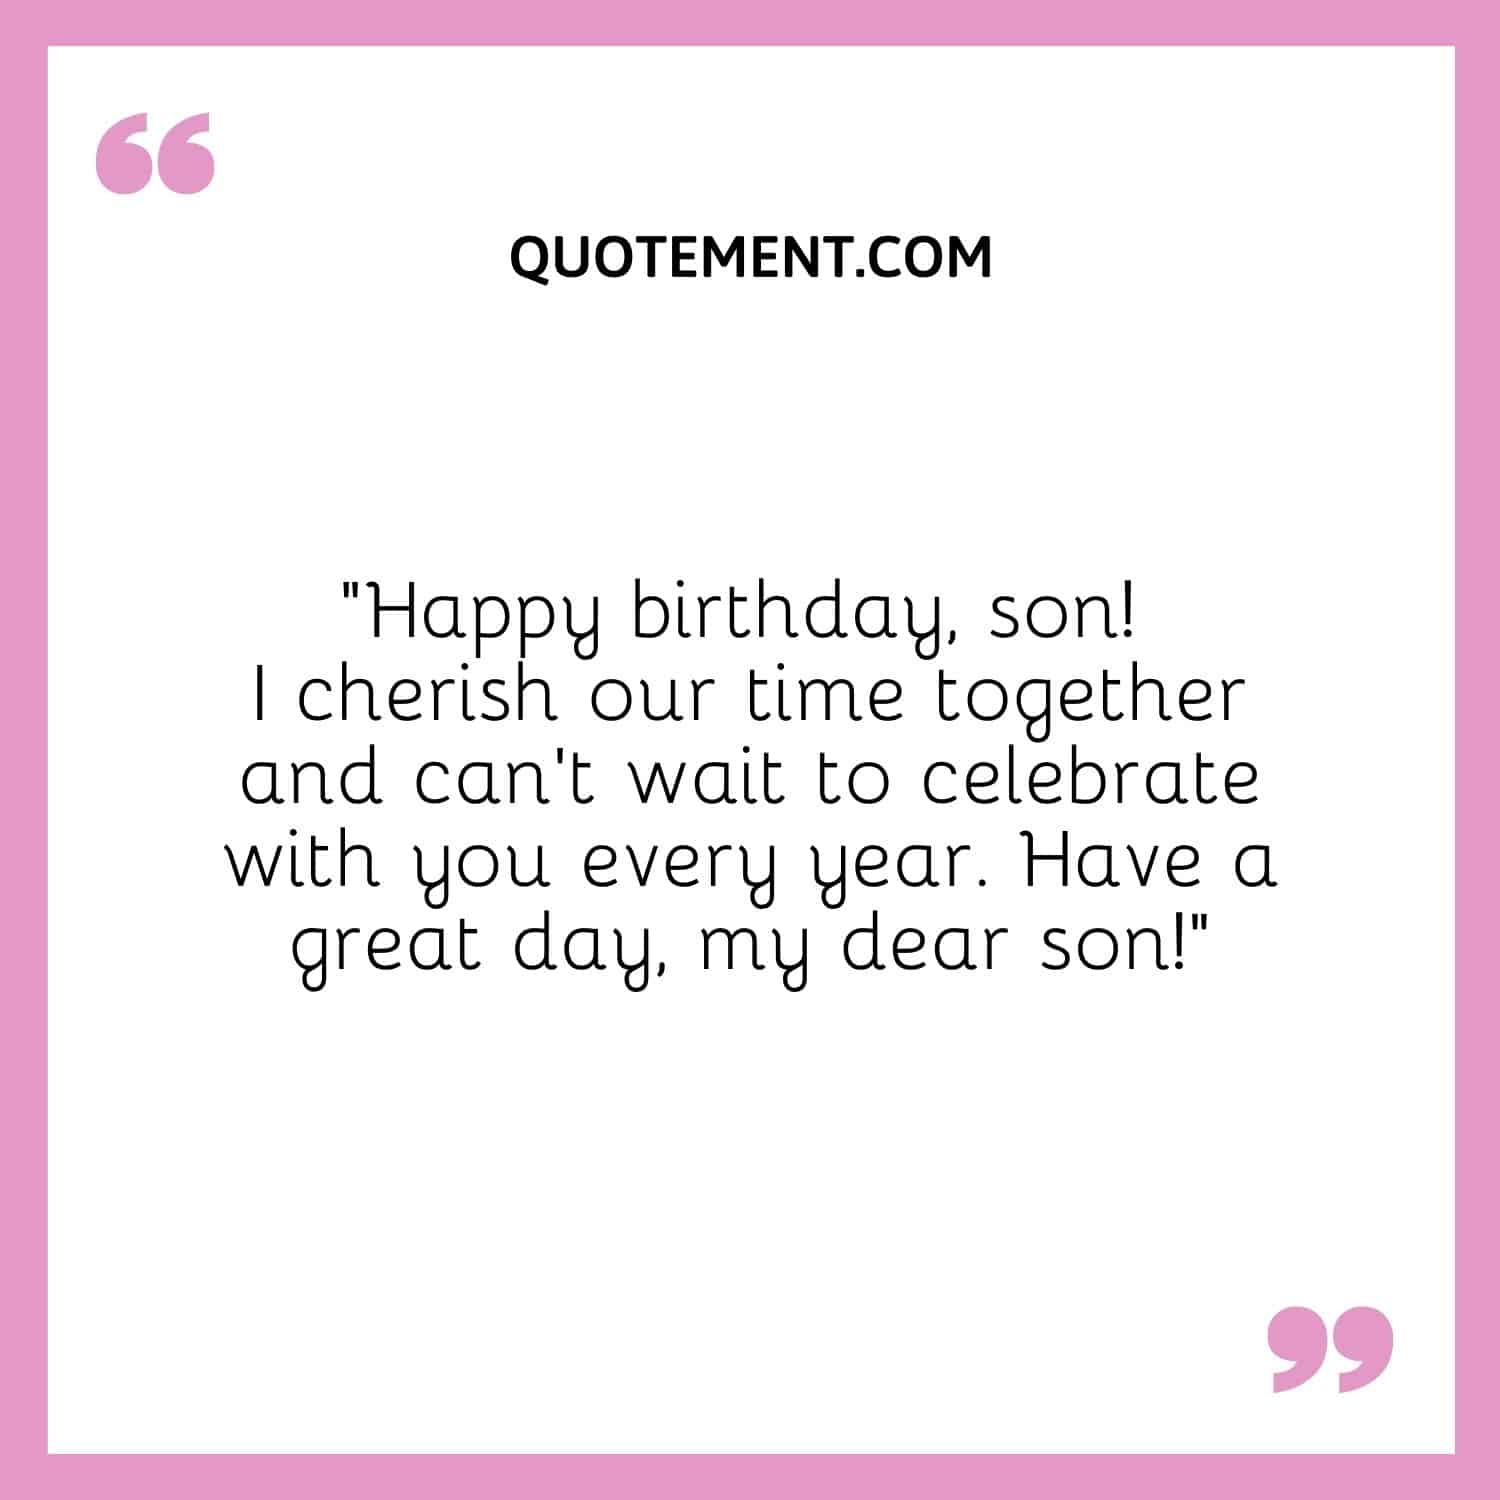 “Happy birthday, son! I cherish our time together and can’t wait to celebrate with you every year. Have a great day, my dear son!”